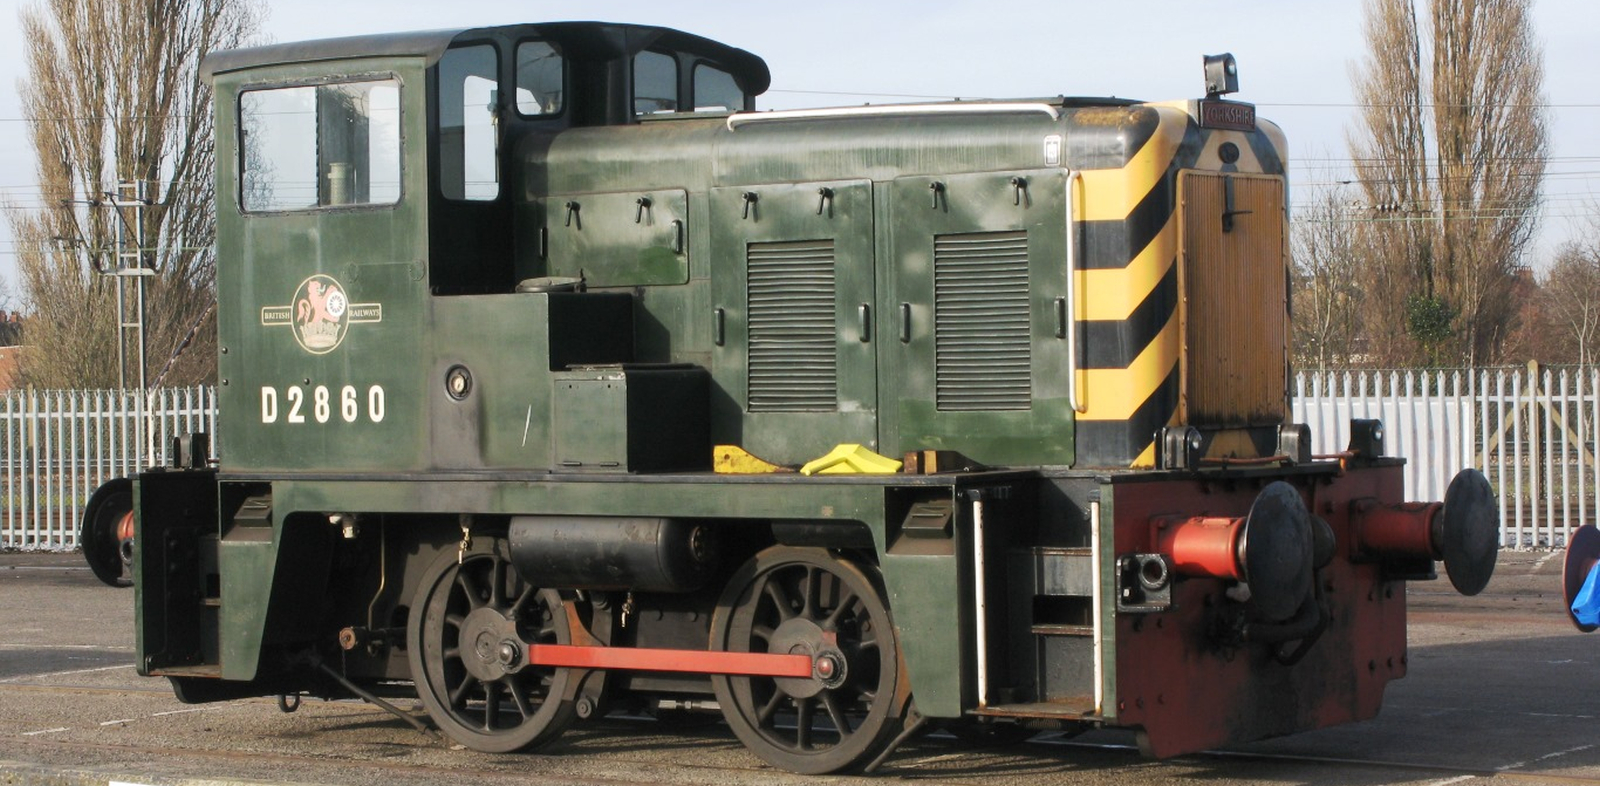 The former D2860 at the National Railway Museum in York